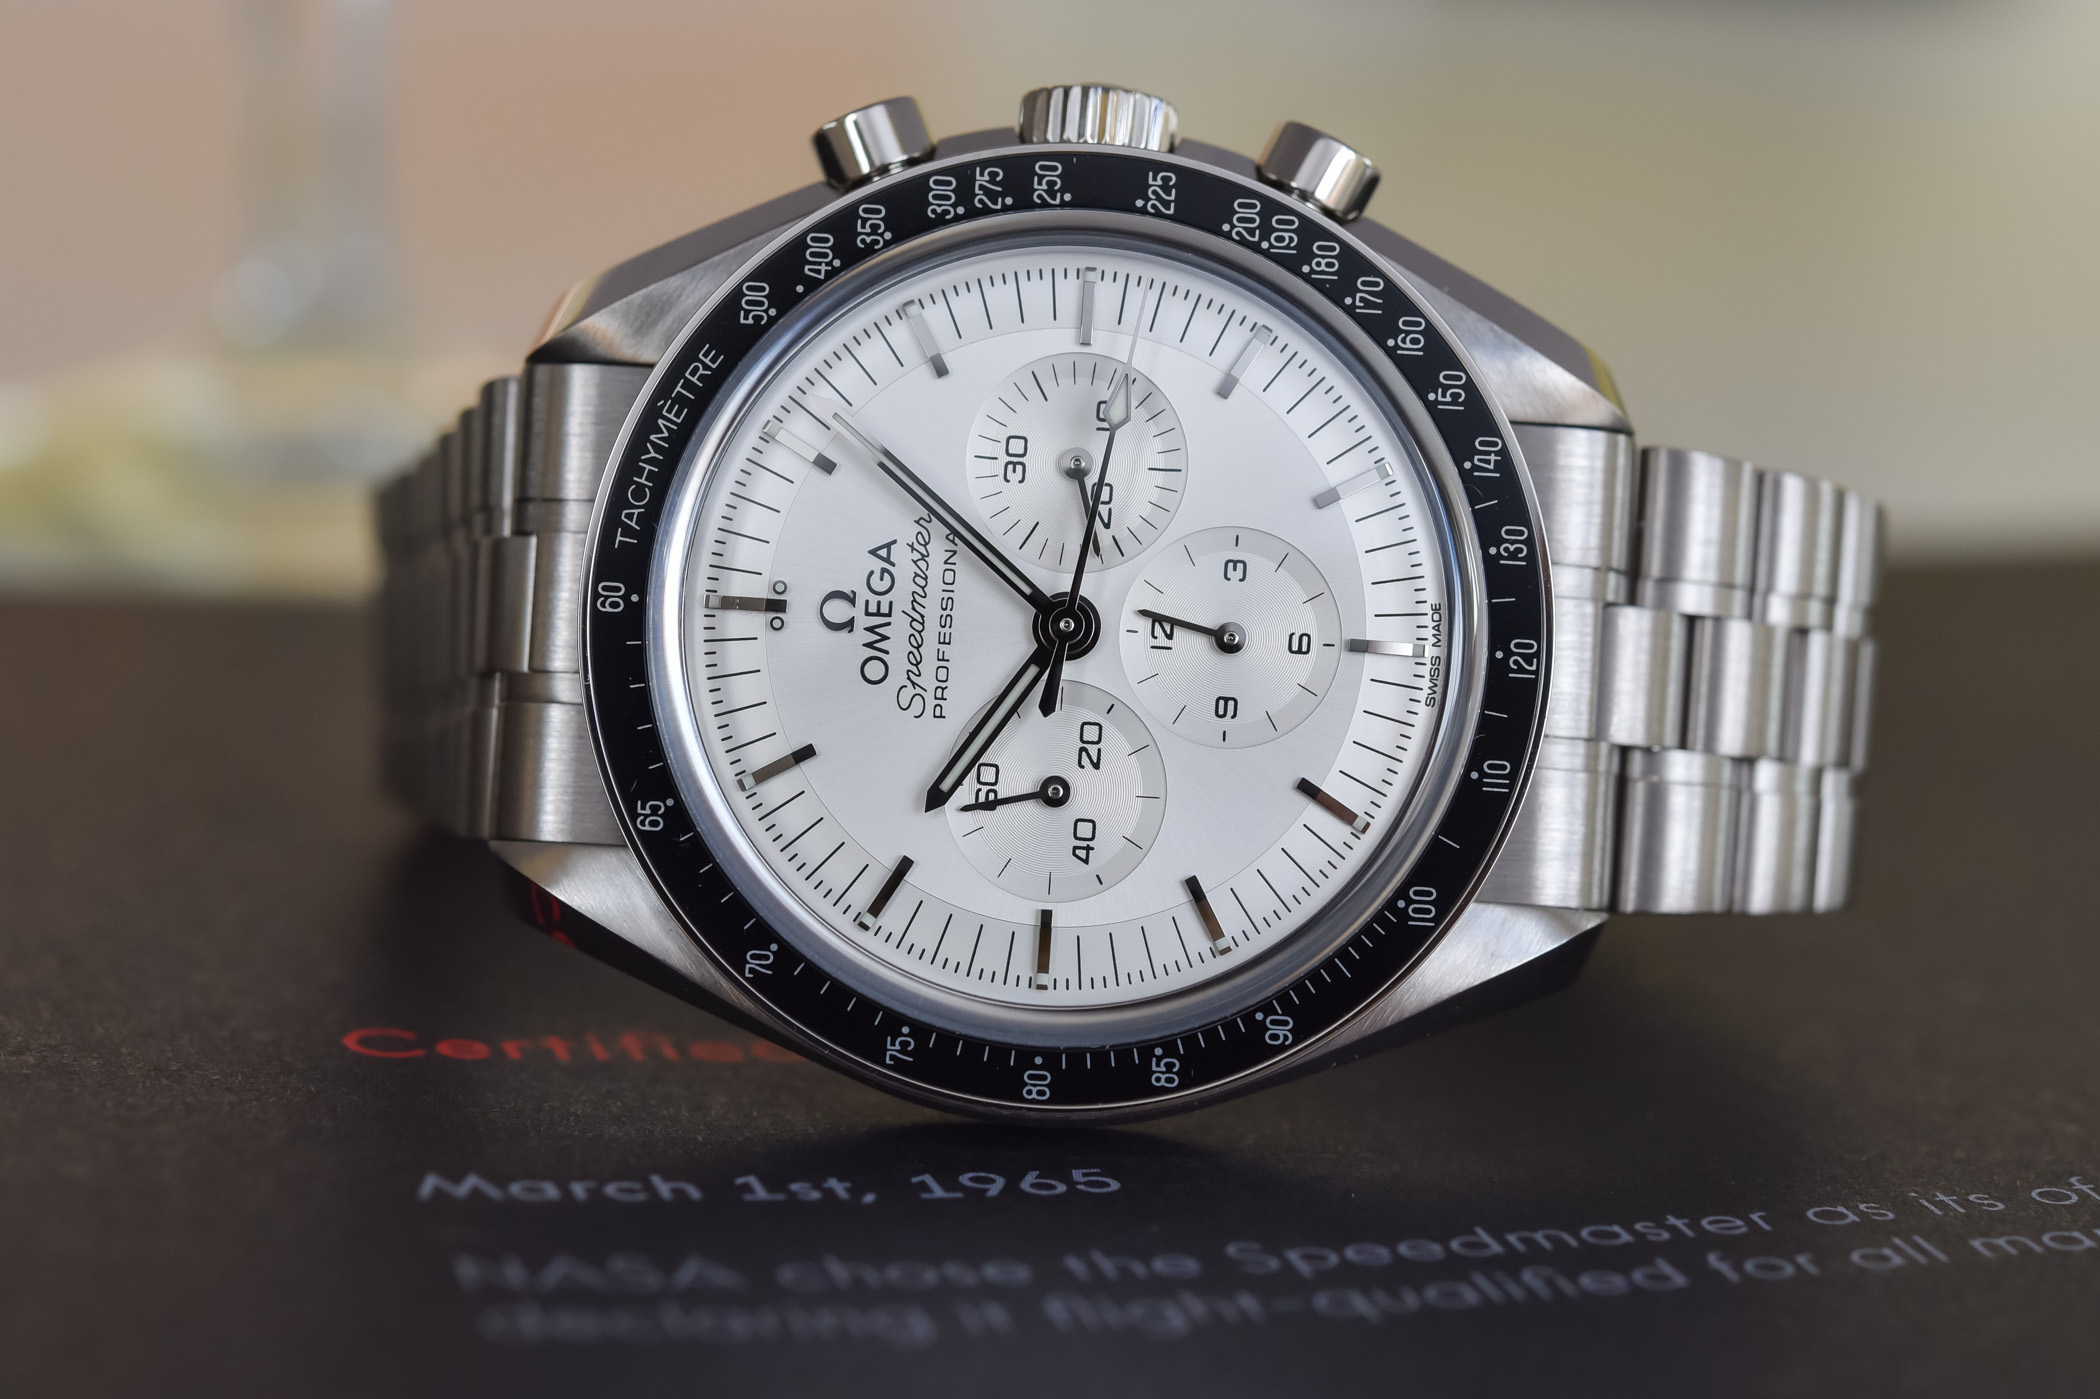 Omega Speedmaster Moonwatch Professional Co-Axial Master Chronometer Canopus Gold Silver dial 310.60.42.50.02.001